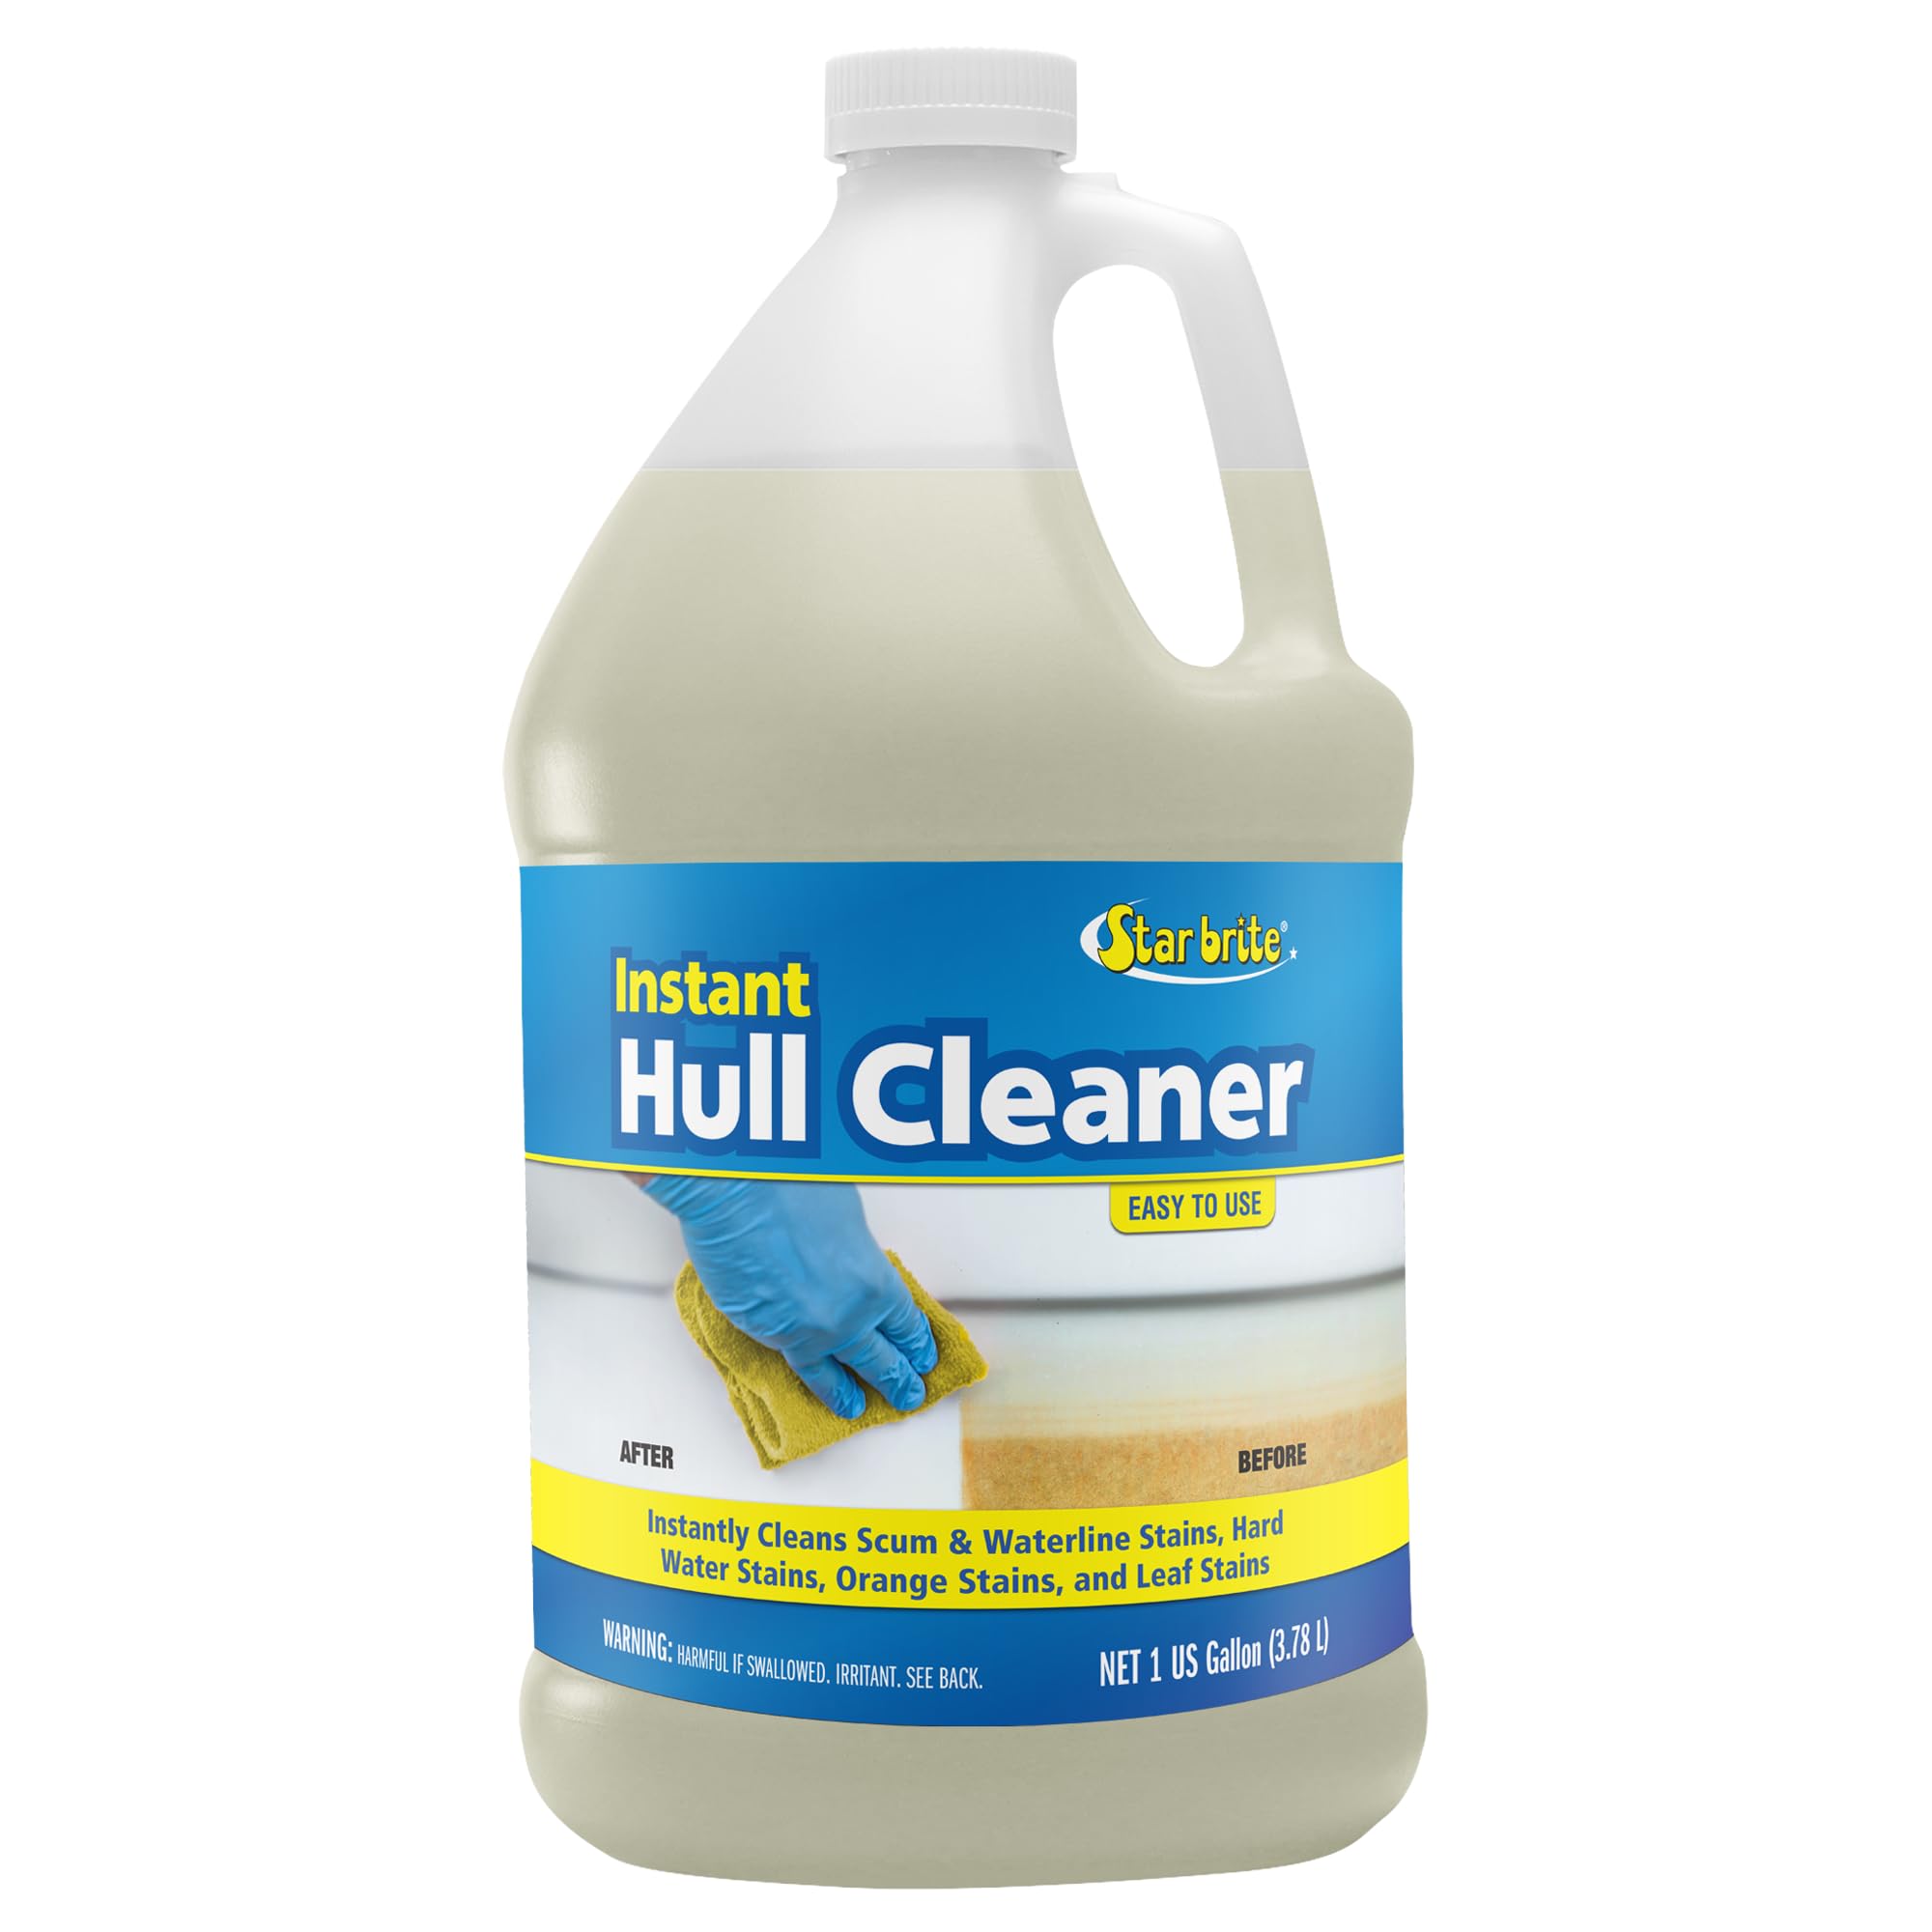 the Star brite instant hull cleaner